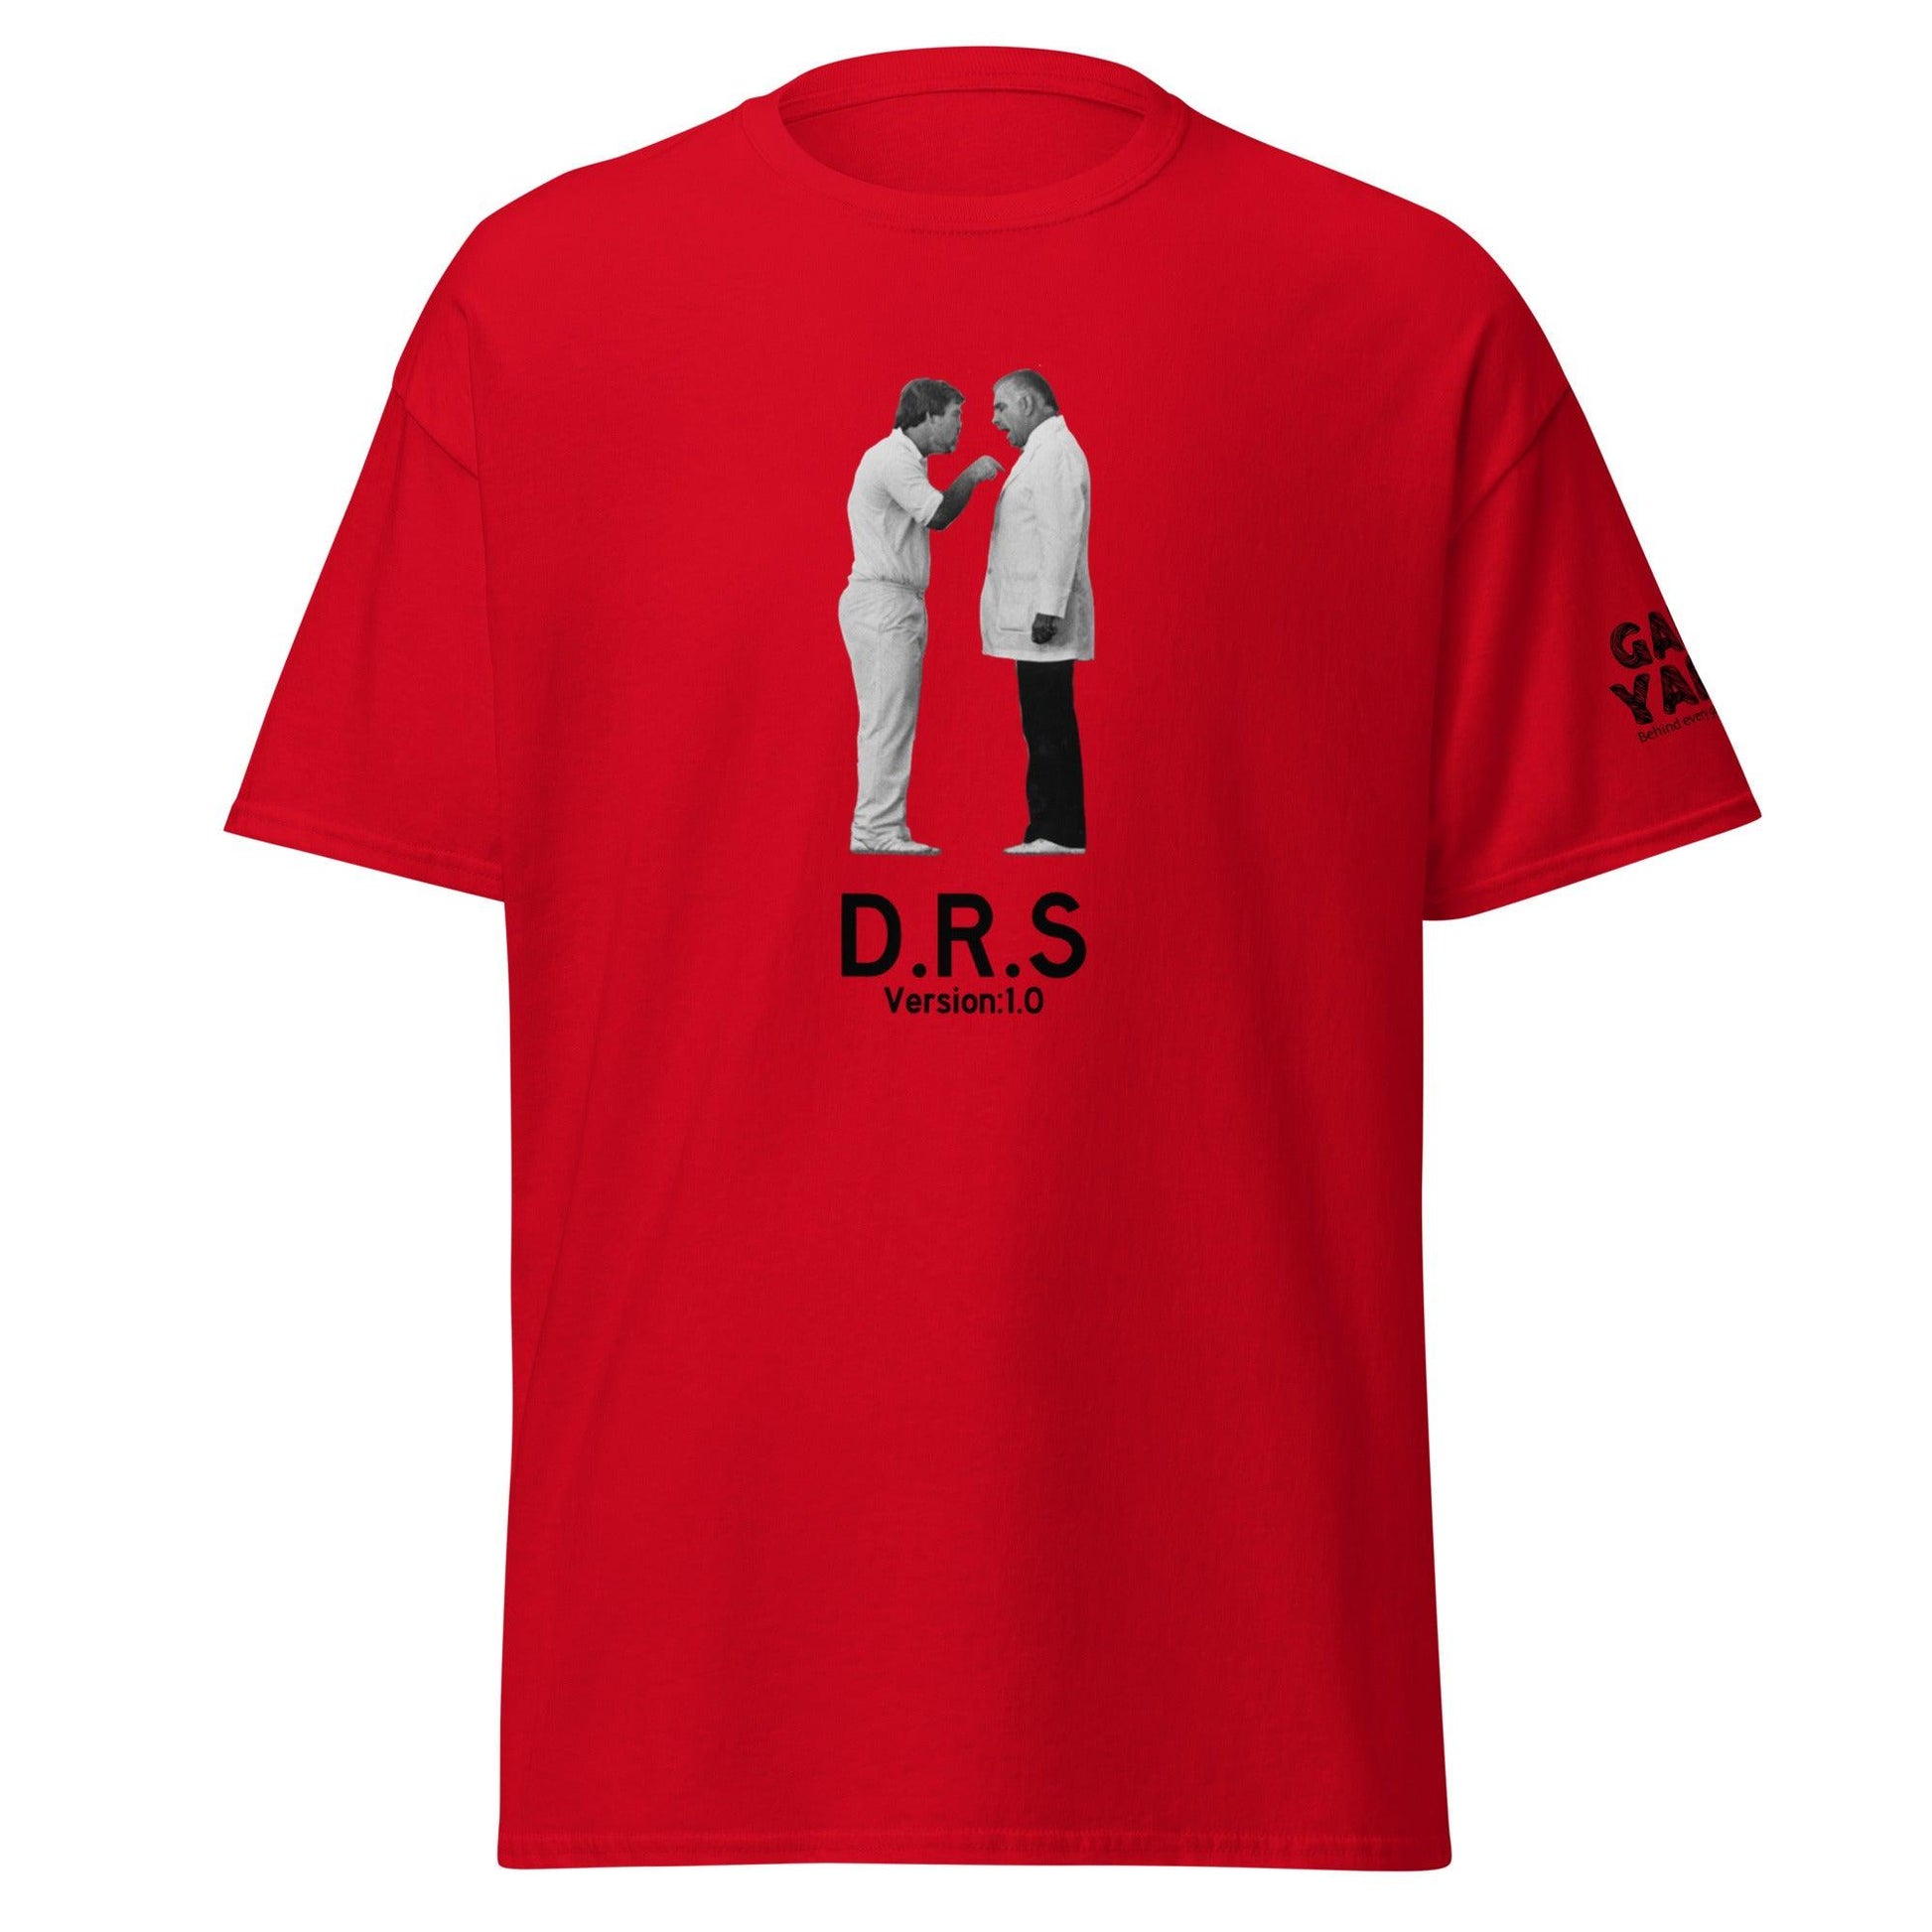 Mike Gatting DRS Version 1.0 t-shirt by Game Yarns